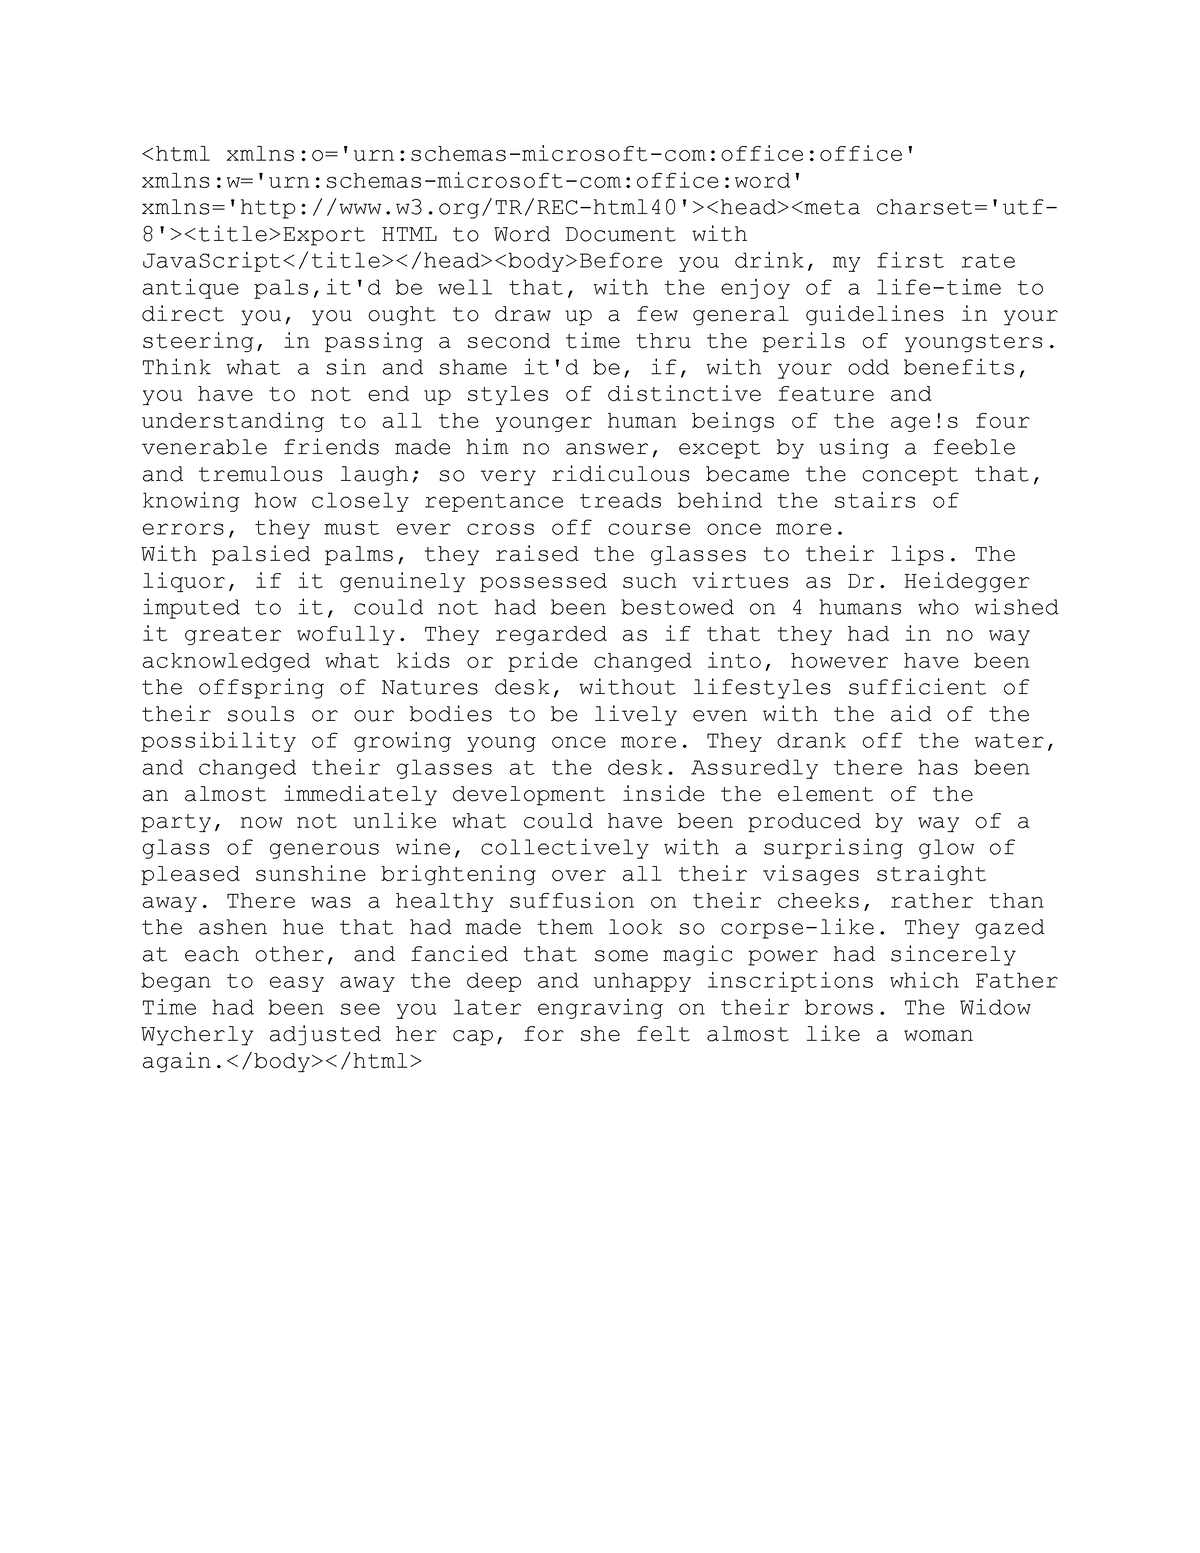 document-part-1-4-32-12-pm-export-html-to-word-document-with-studocu